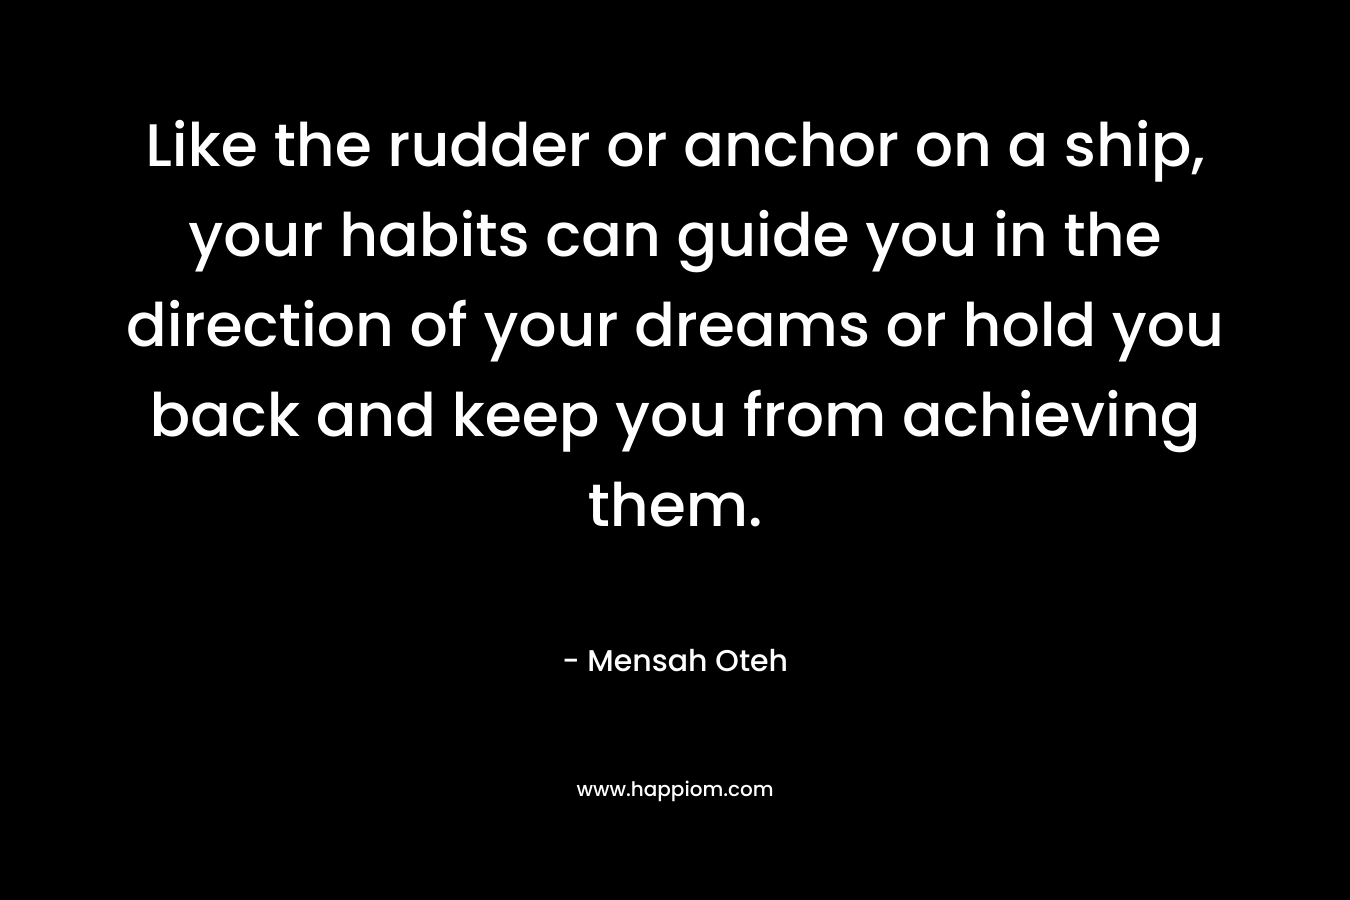 Like the rudder or anchor on a ship, your habits can guide you in the direction of your dreams or hold you back and keep you from achieving them. – Mensah Oteh